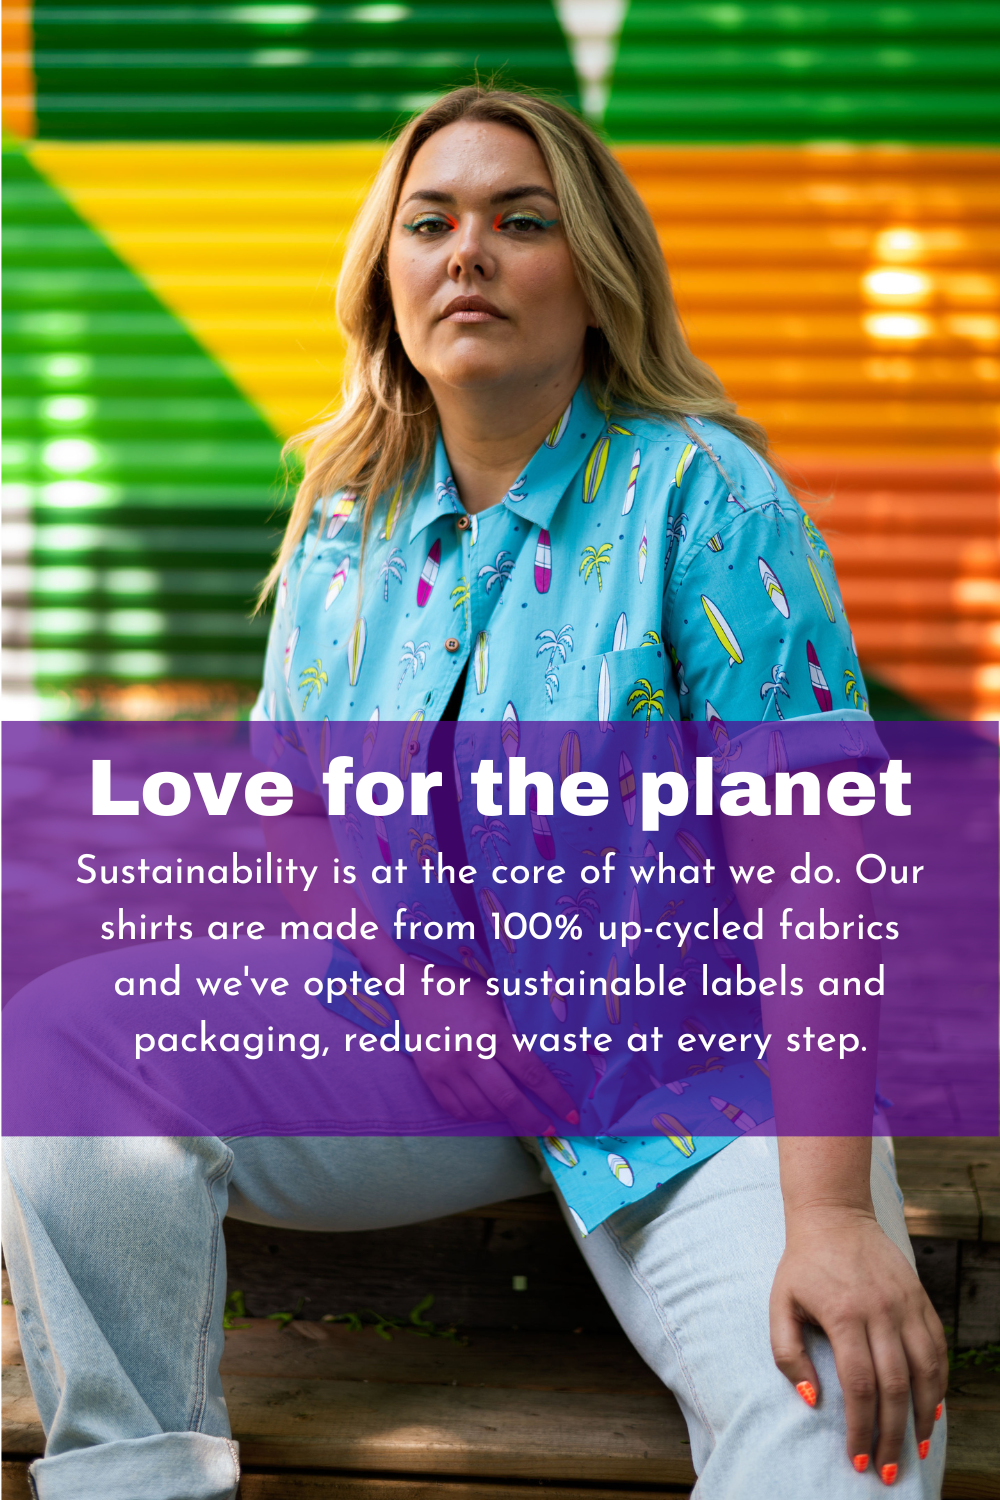 Love for the planet. Sustainability is at the core of what we do. Our shirts are made from 100% up-cycled fabrics and we've opted for sustainable labels and packaging, reducing waste at every step.